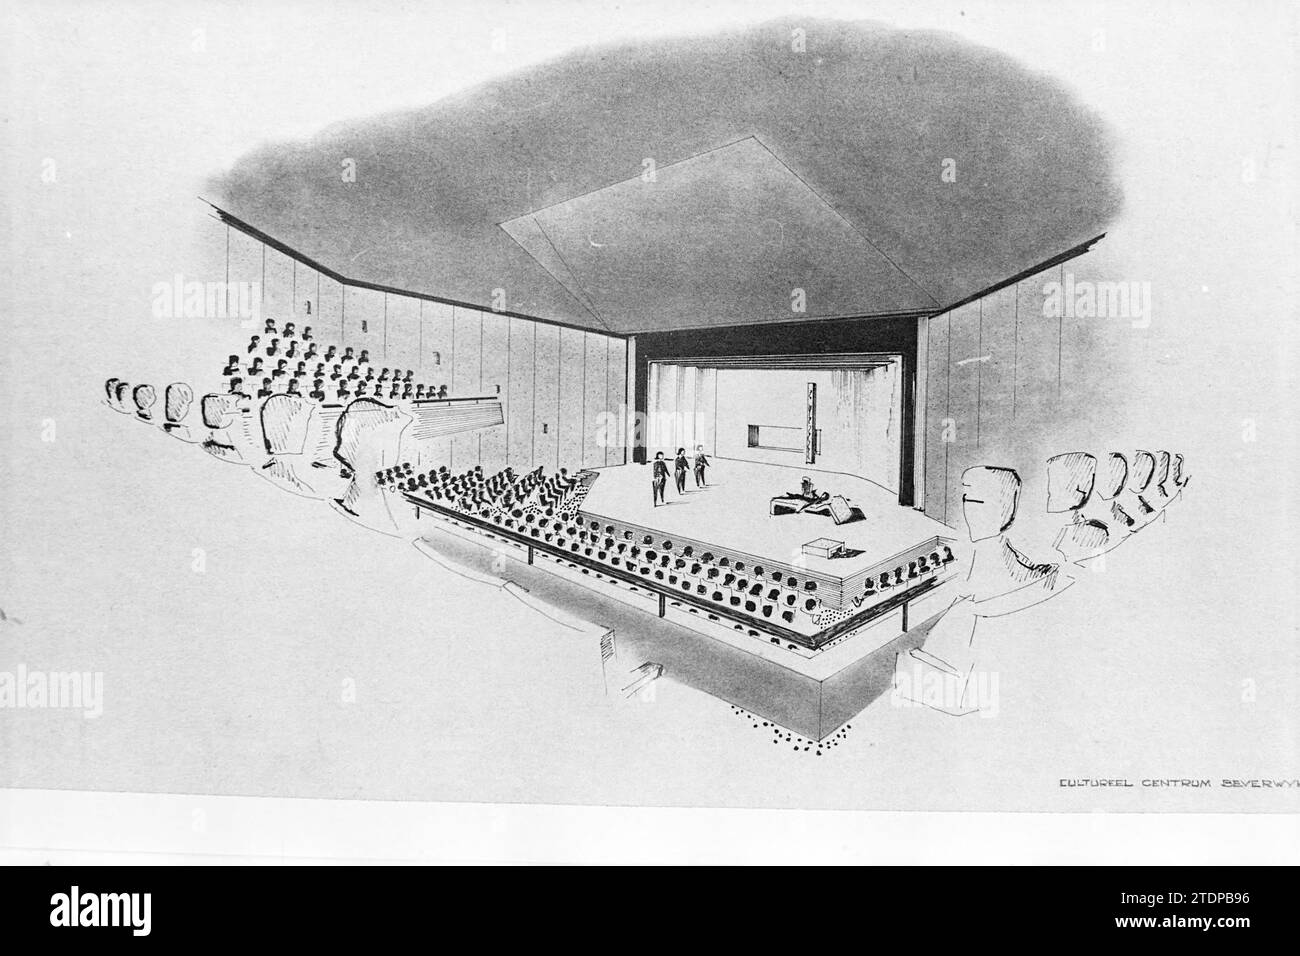 Design drawing for Cultural Center, Beverwijk, Kerkstraat, The Netherlands, Whizgle News from the Past, Tailored for the Future. Explore historical narratives, Dutch The Netherlands agency image with a modern perspective, bridging the gap between yesterday's events and tomorrow's insights. A timeless journey shaping the stories that shape our future Stock Photo